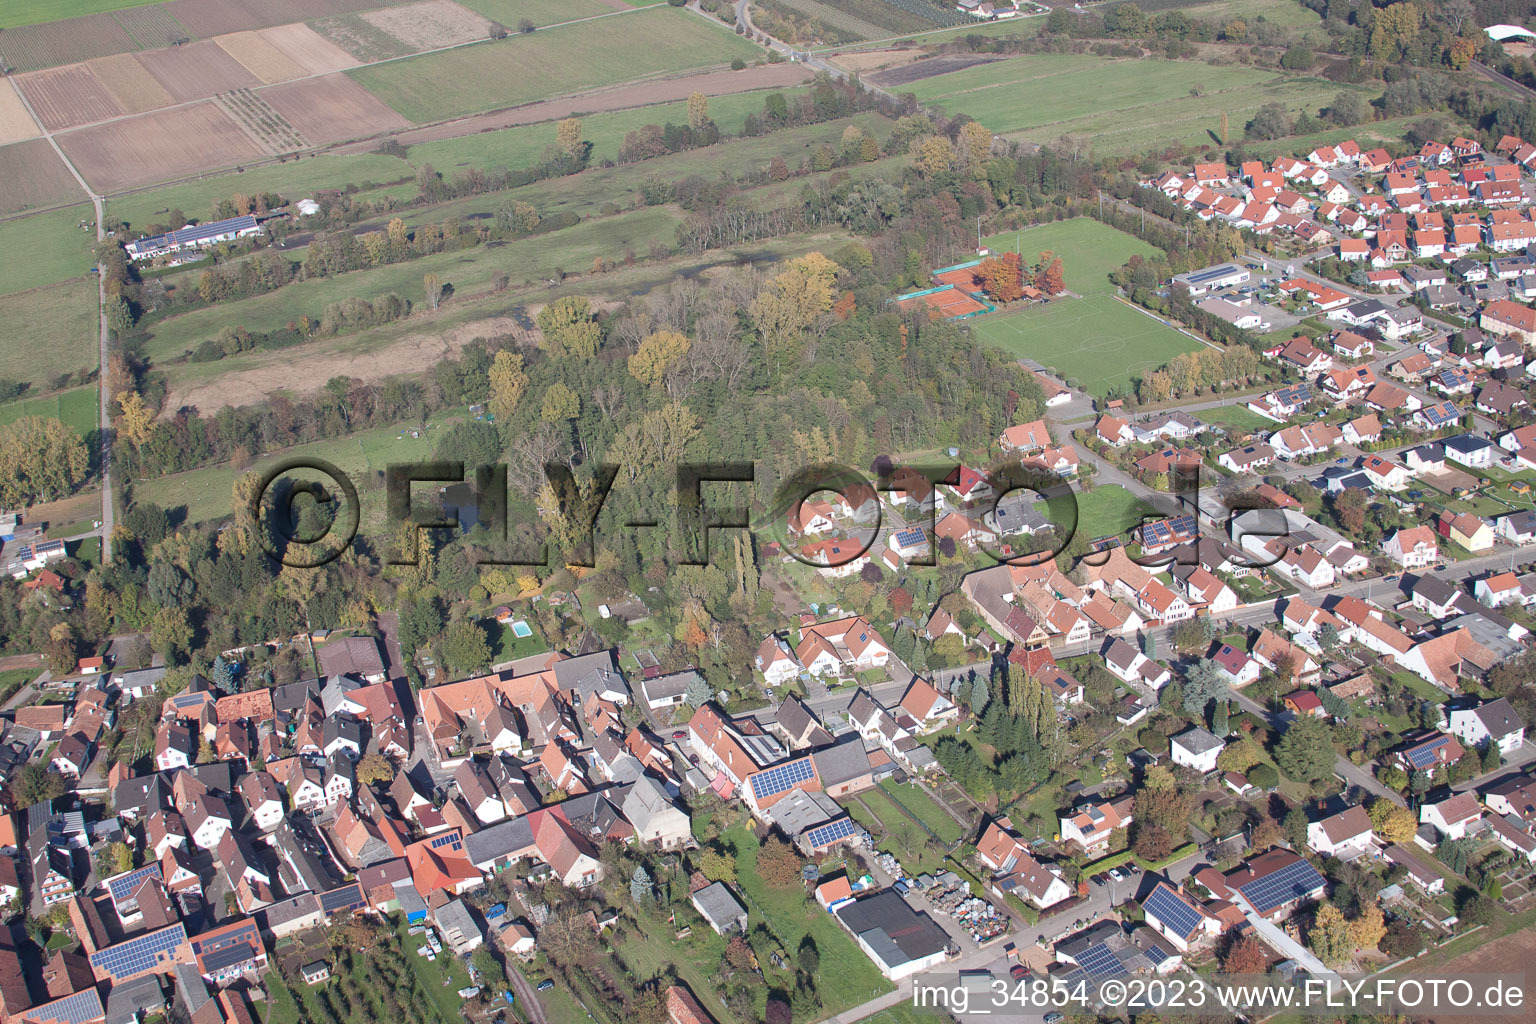 Winden in the state Rhineland-Palatinate, Germany viewn from the air